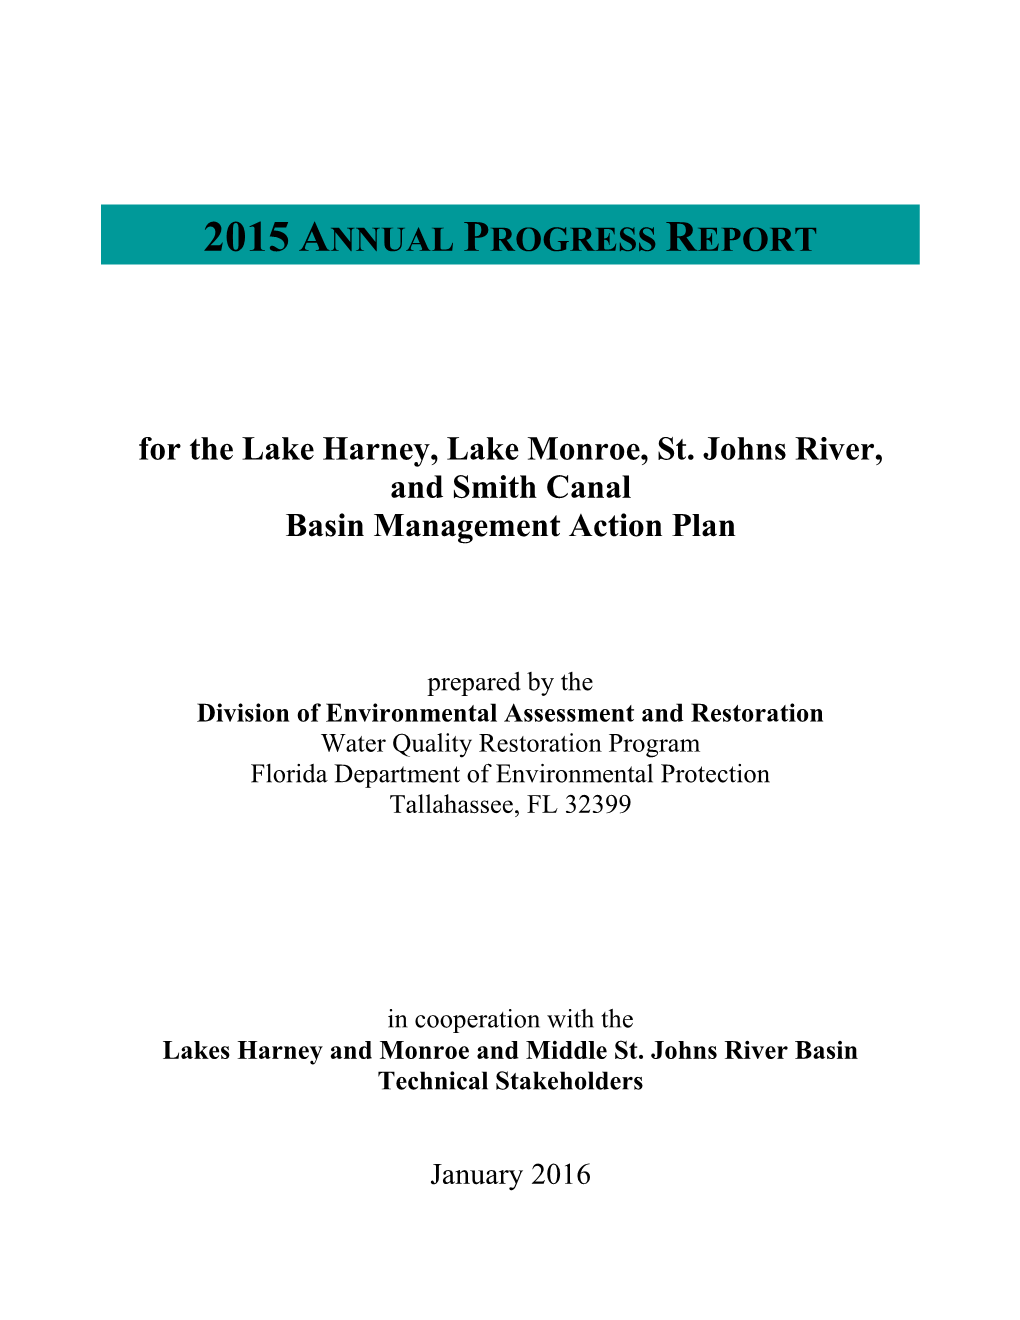 For the Lake Harney, Lake Monroe, St. Johns River, and Smith Canal Basin Management Action Plan